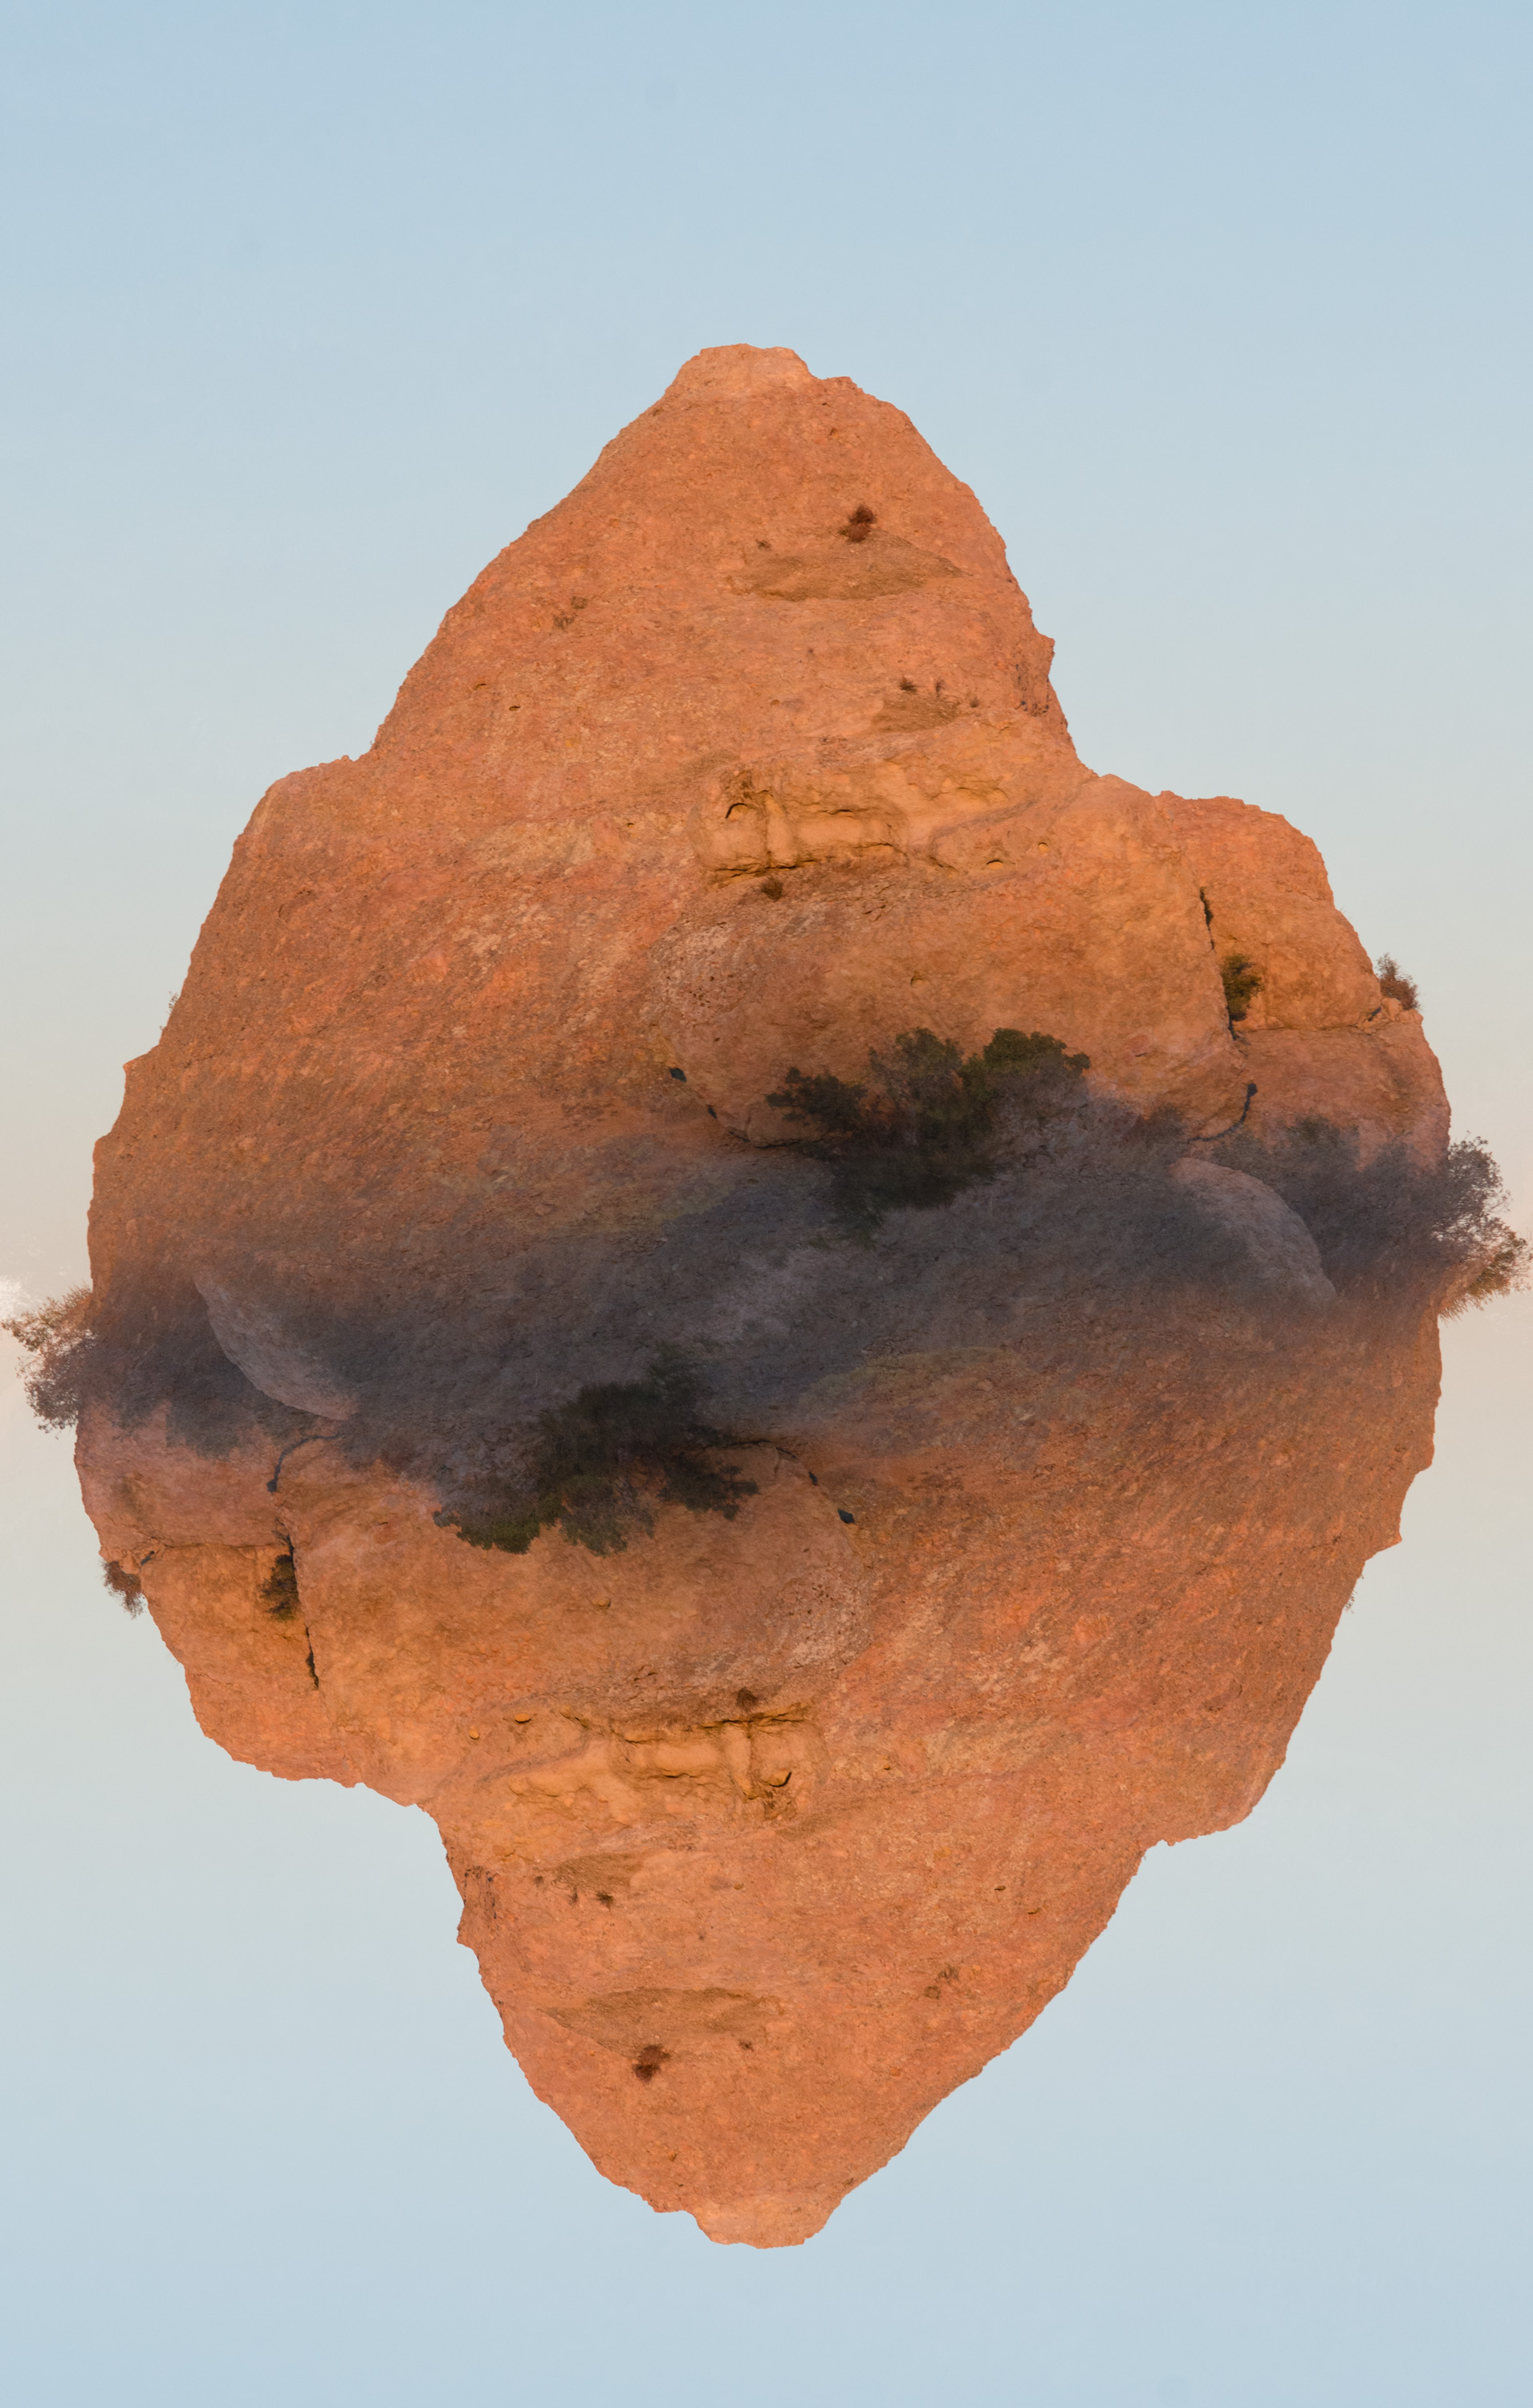   Floating Rock , 2013 Archival Pigment Print 40 x 30 inches 